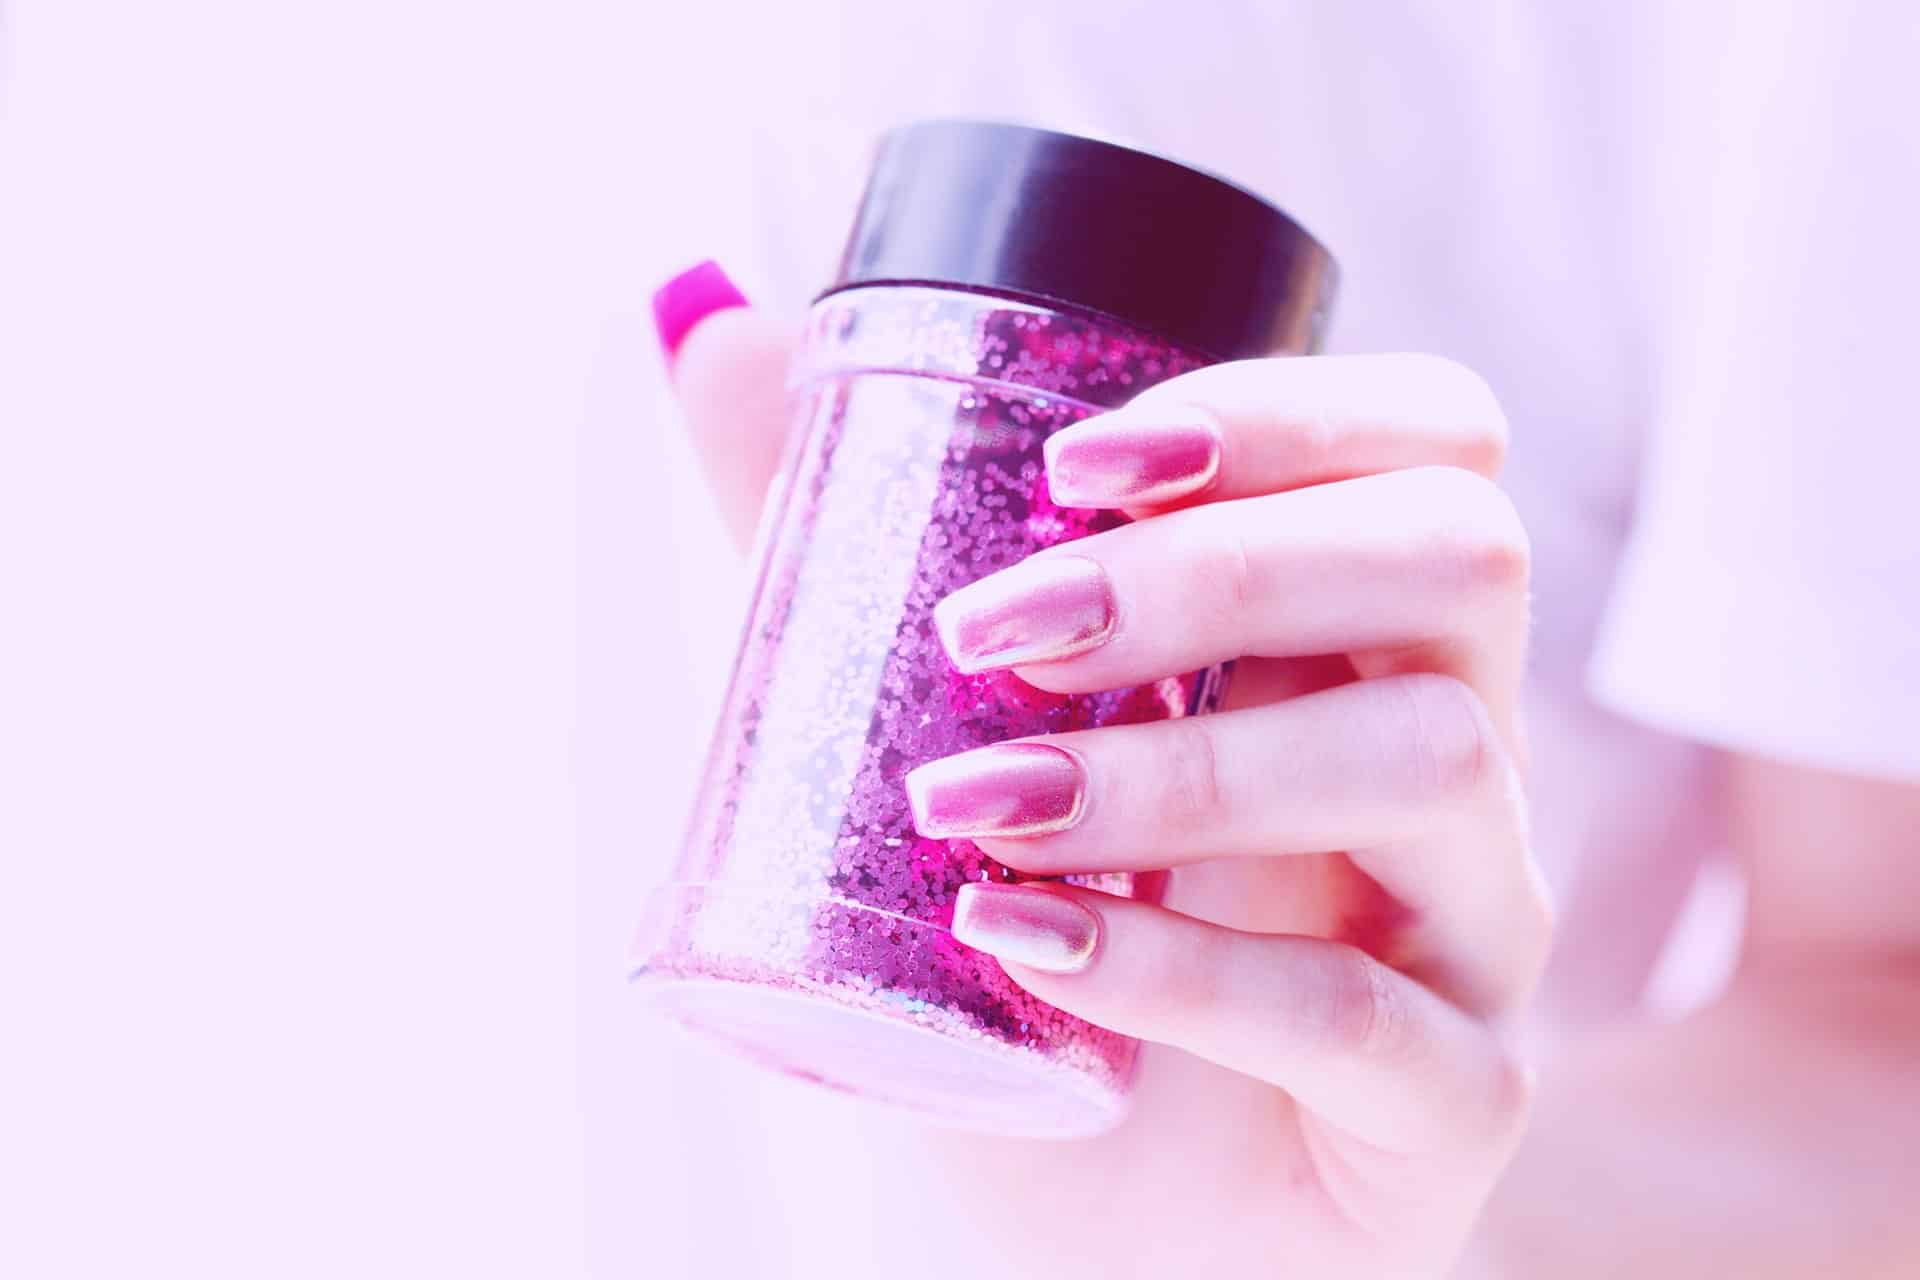 Nails with holo effect – how to make them?